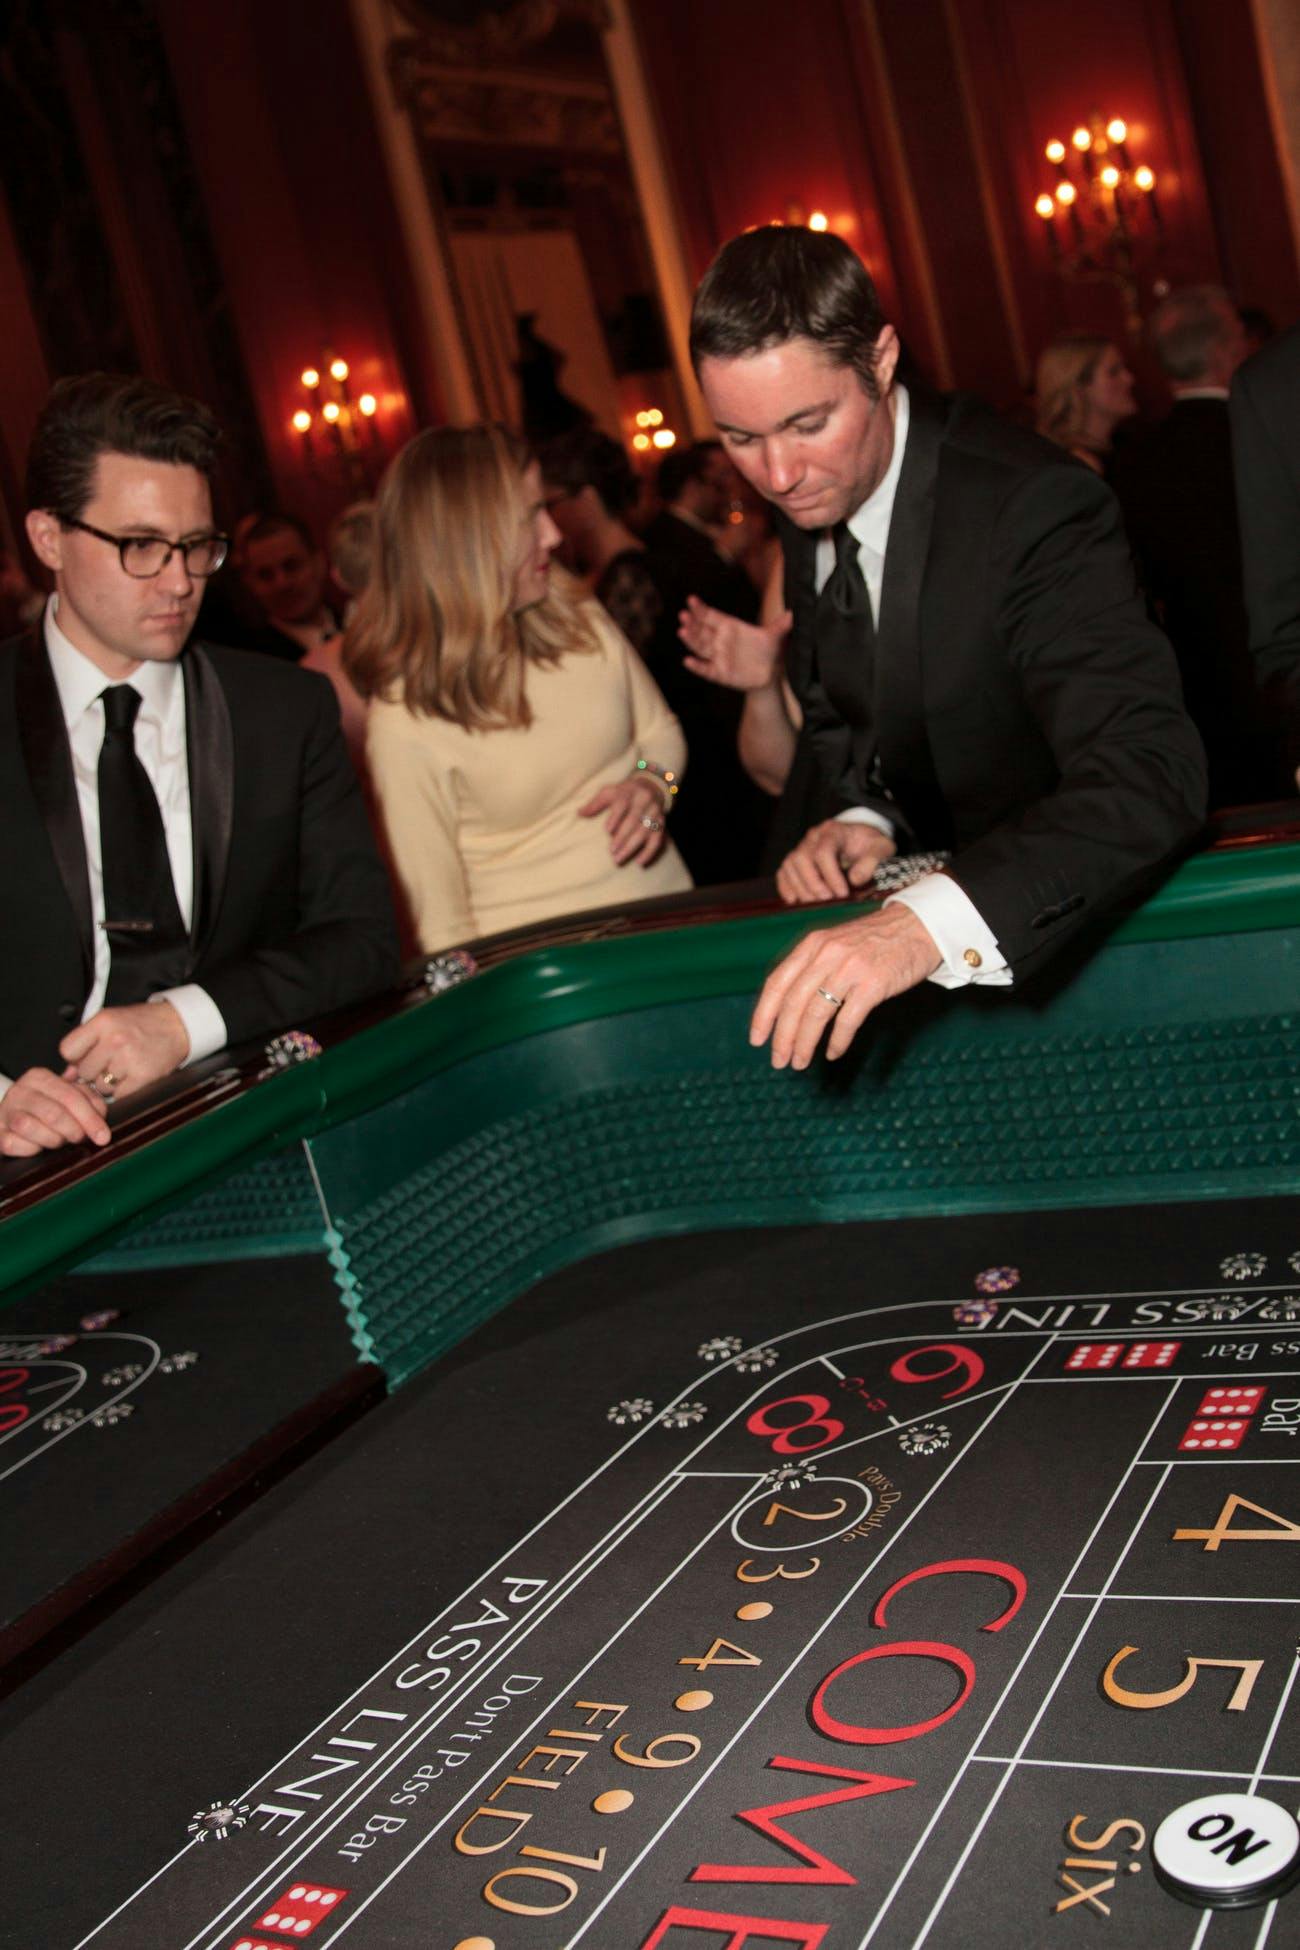 Two Men Rolling Dice and Having a Good Time at a Casino Table